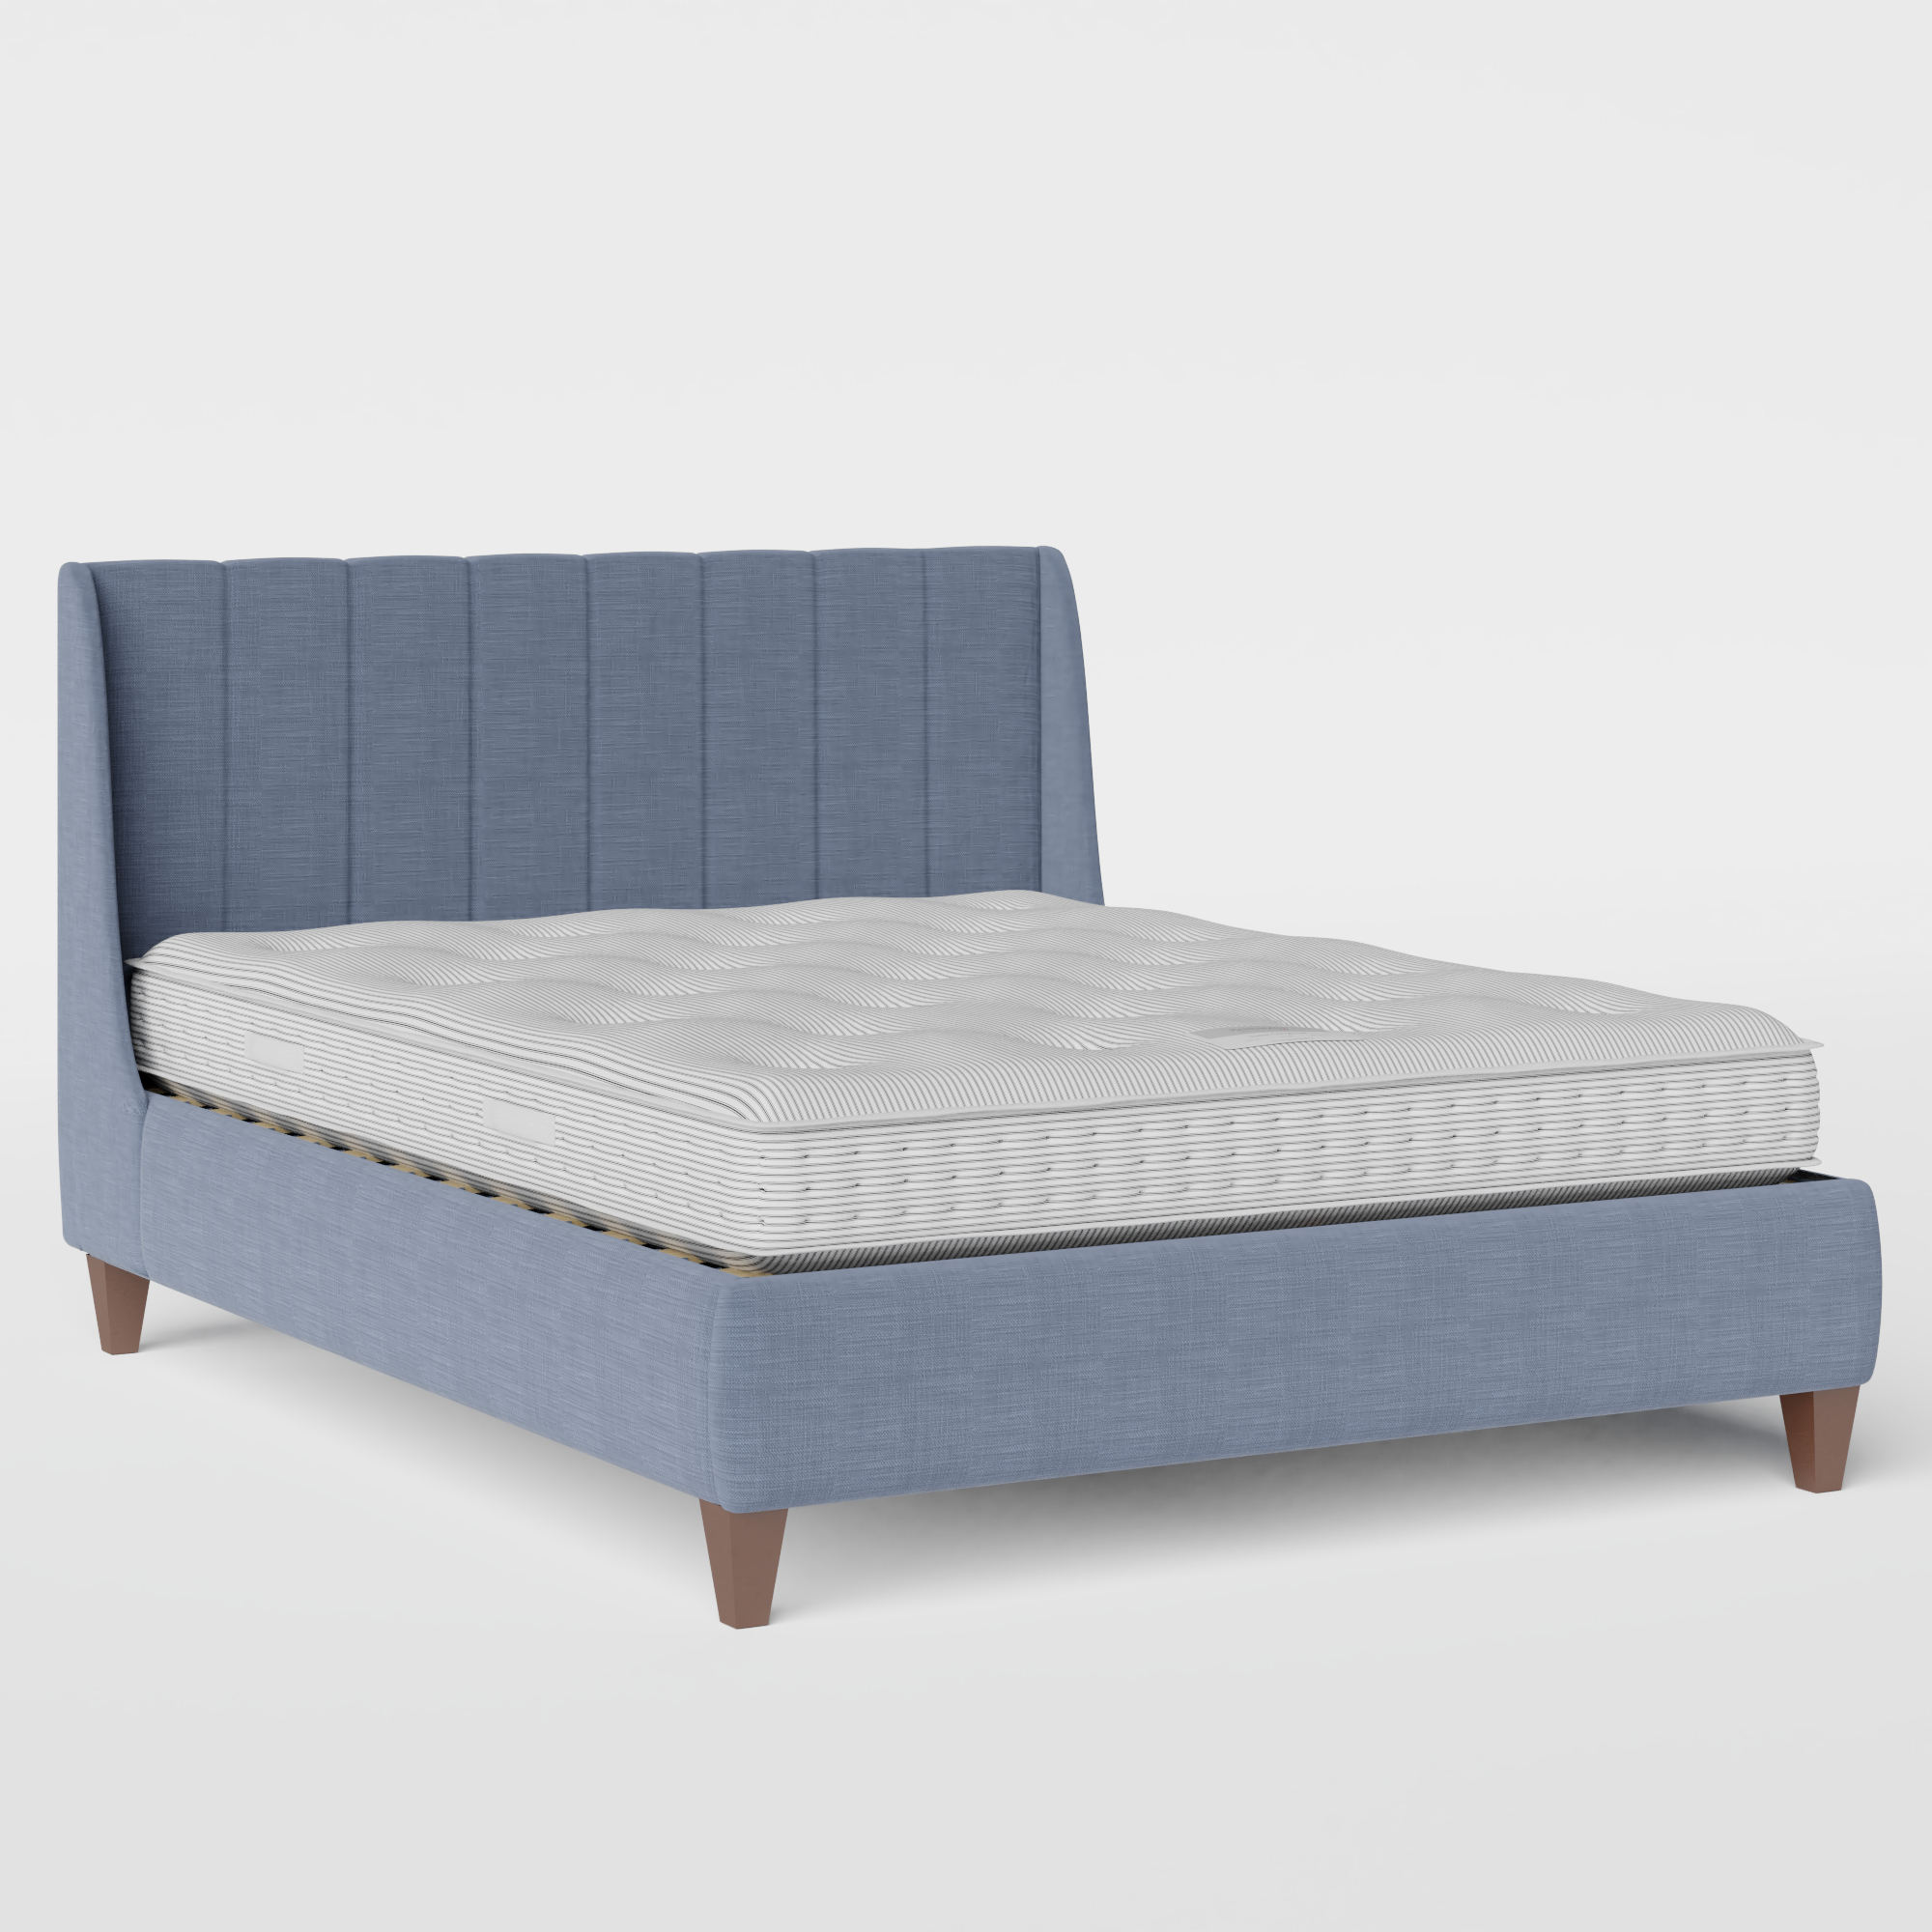 Sunderland Pleated upholstered bed in blue fabric